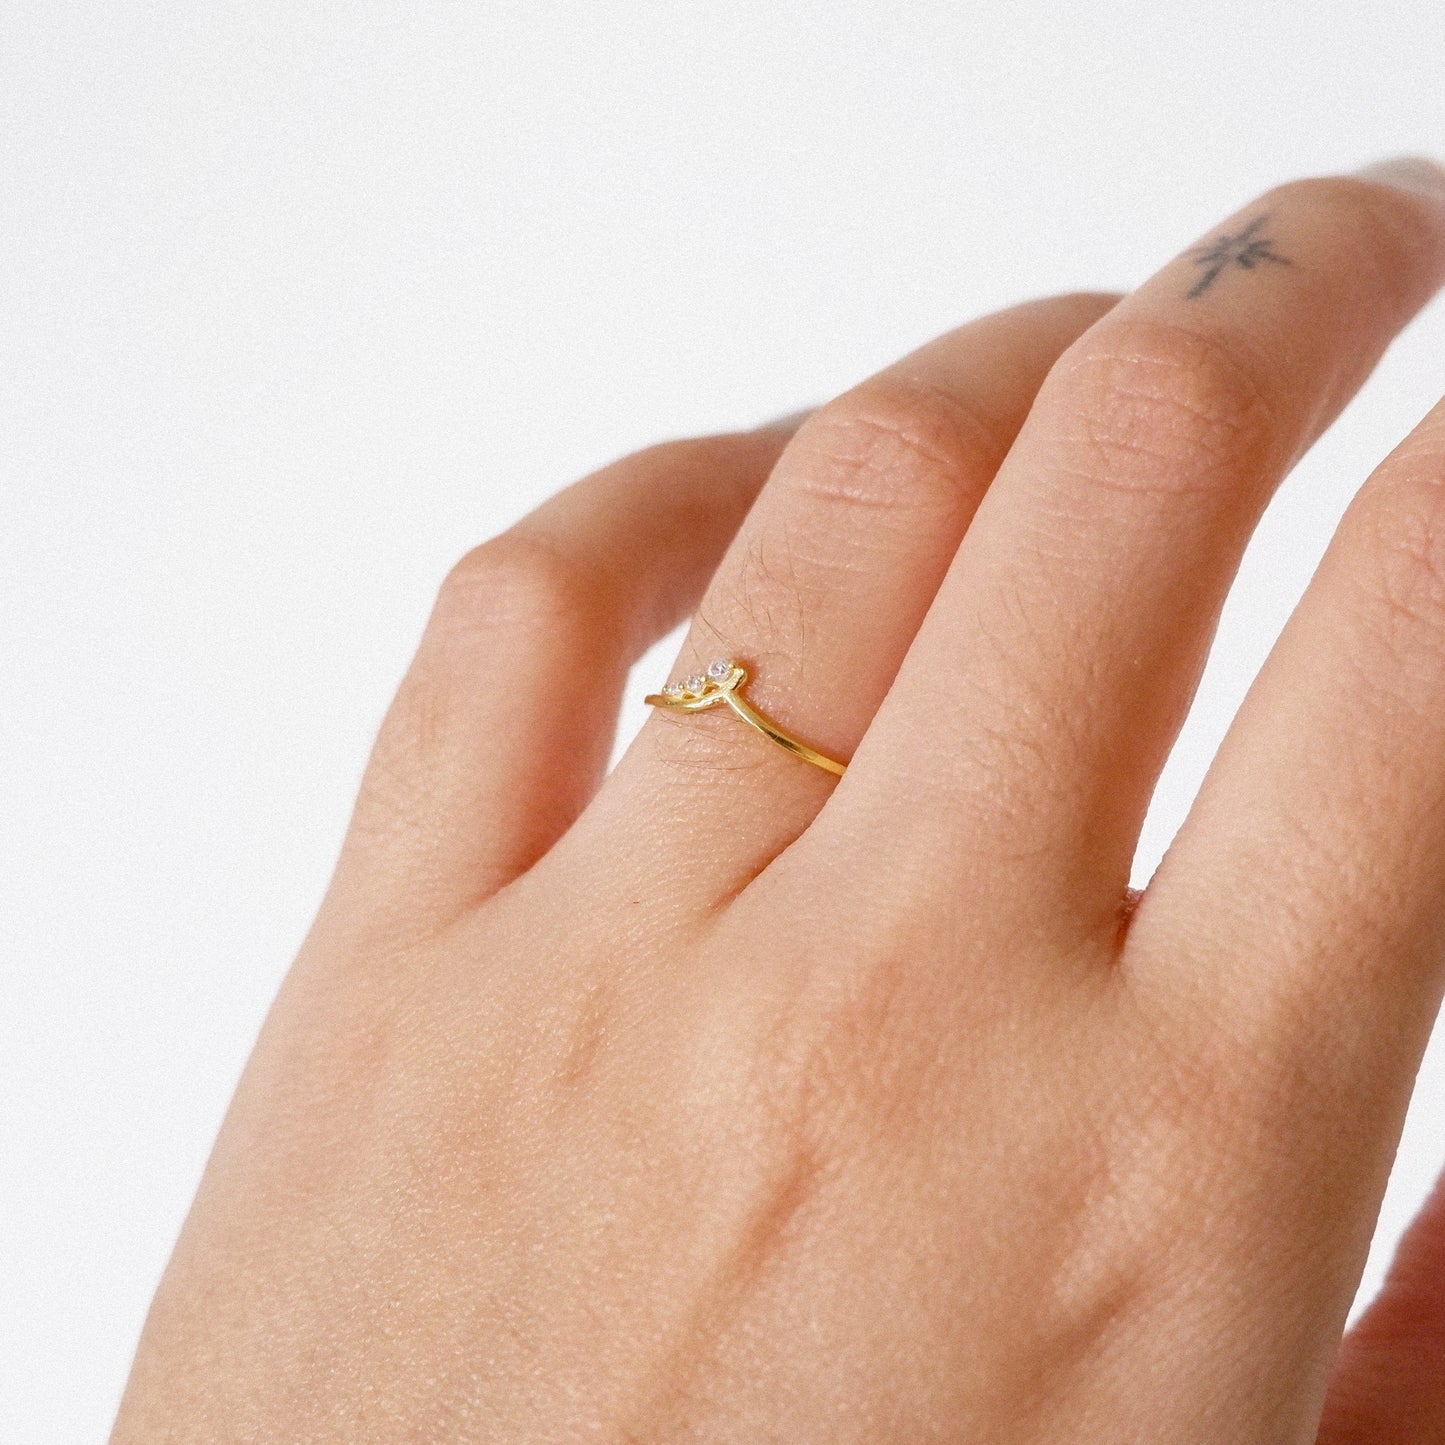 The Ocean Ring in Solid Gold